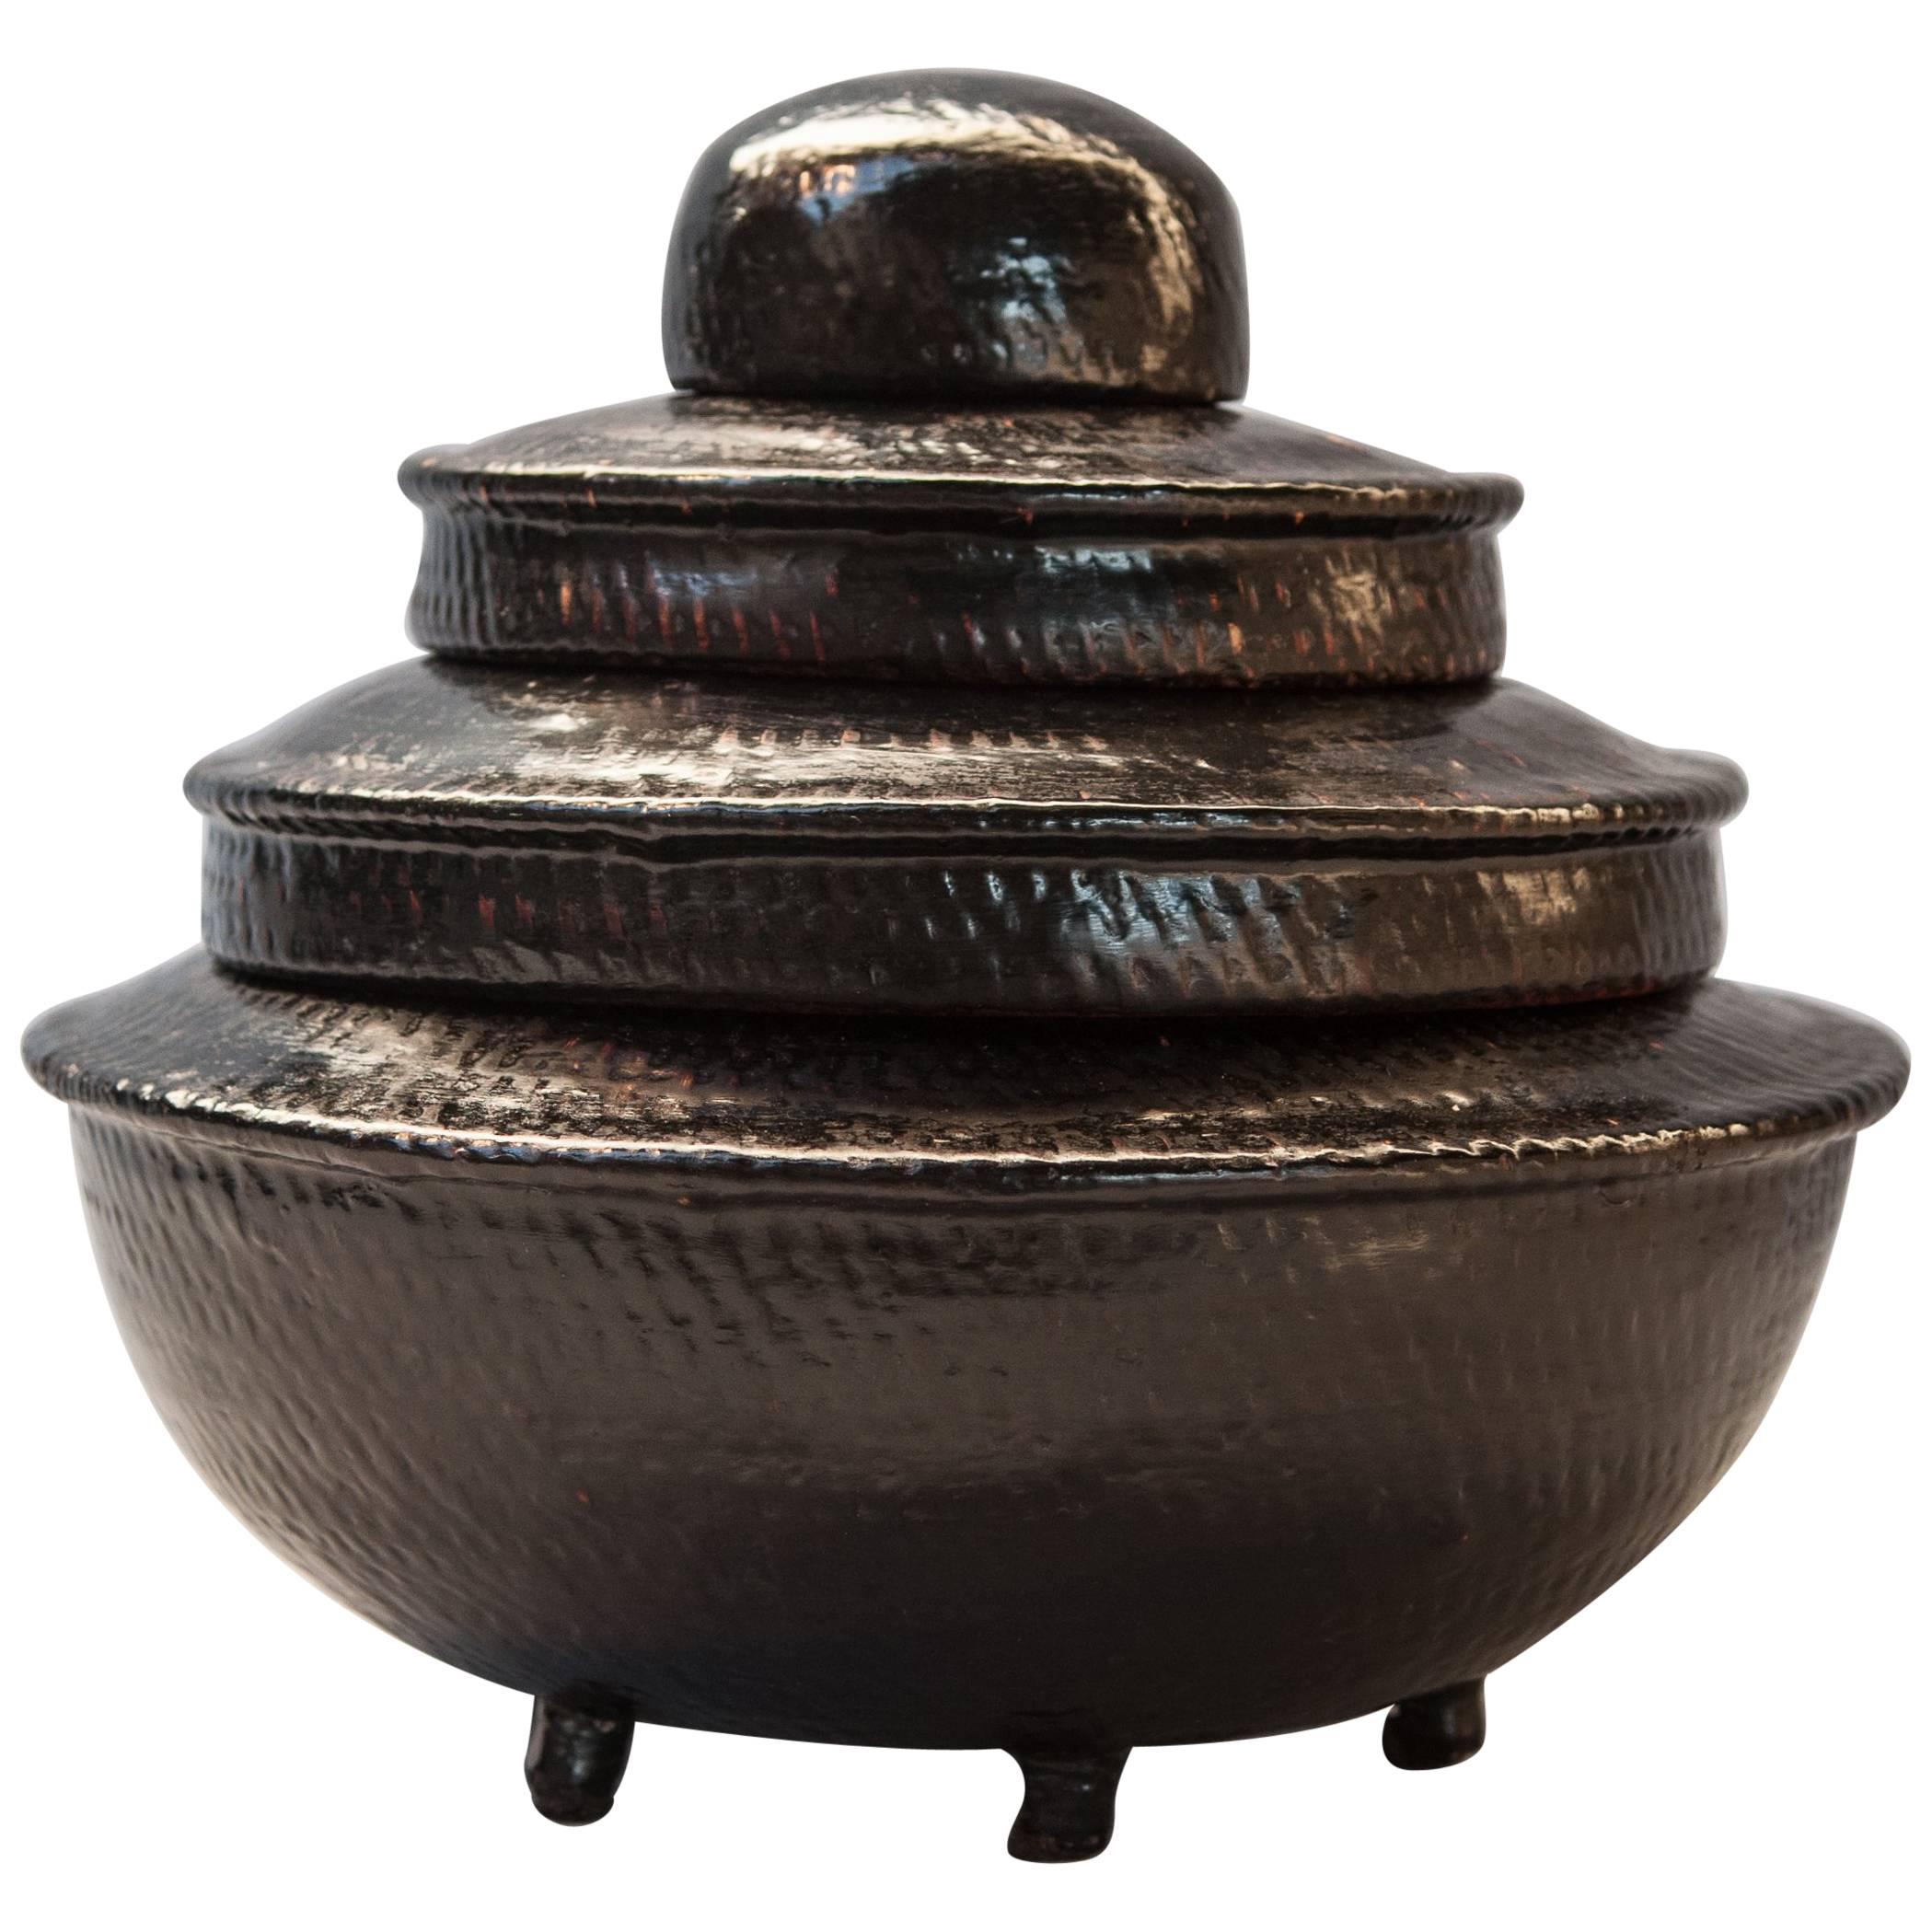 Tiered Black Lacquer Offering Vessel, Hsun Gwet, Burma Mid-20th Century, Rattan